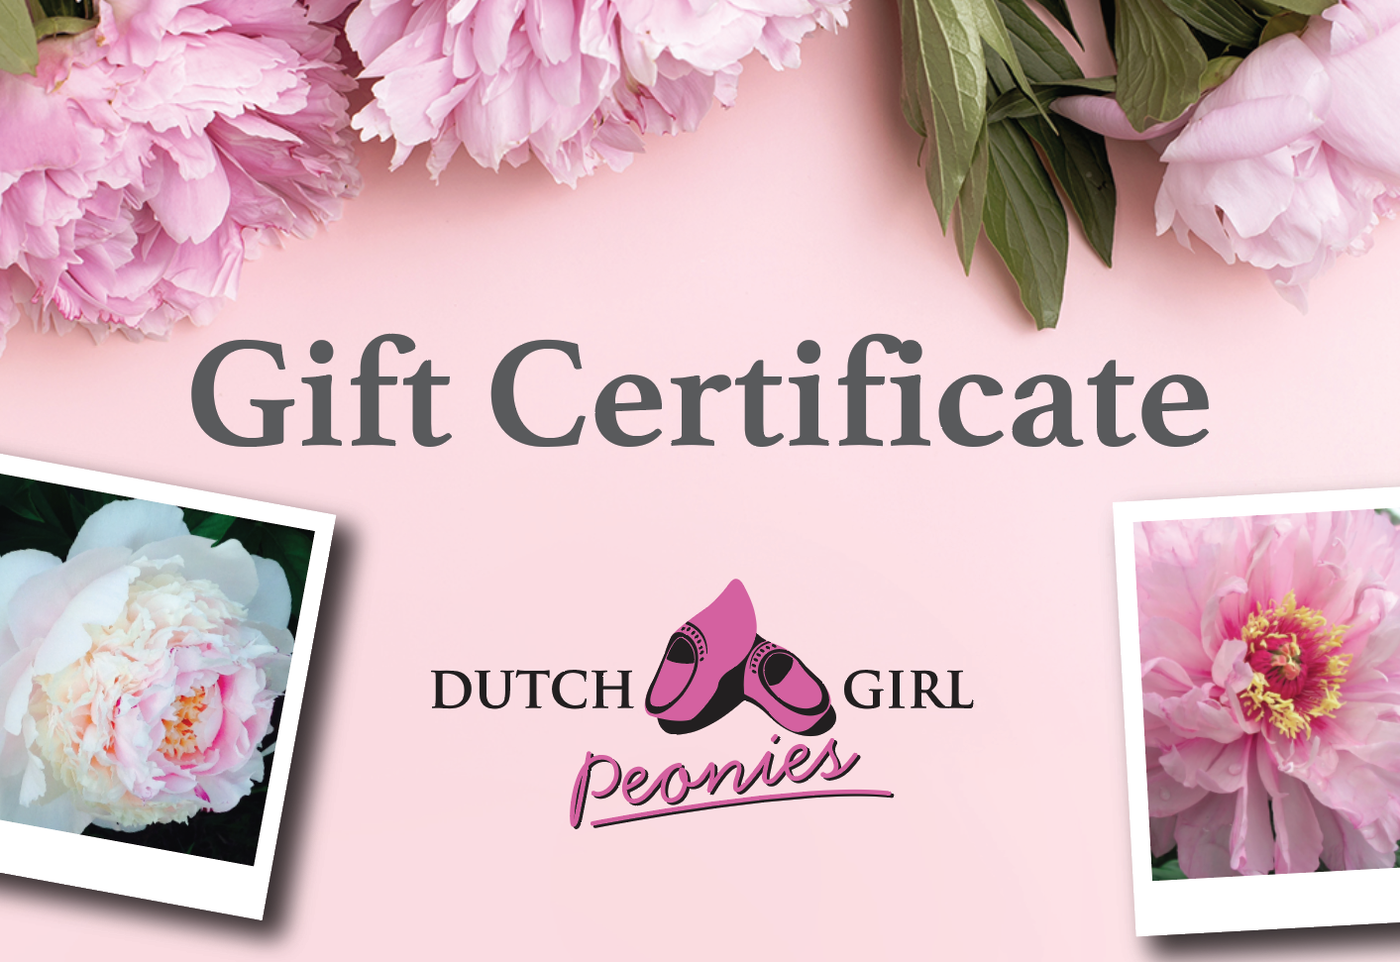 Gift Certificate for Dutch Girl Peonies